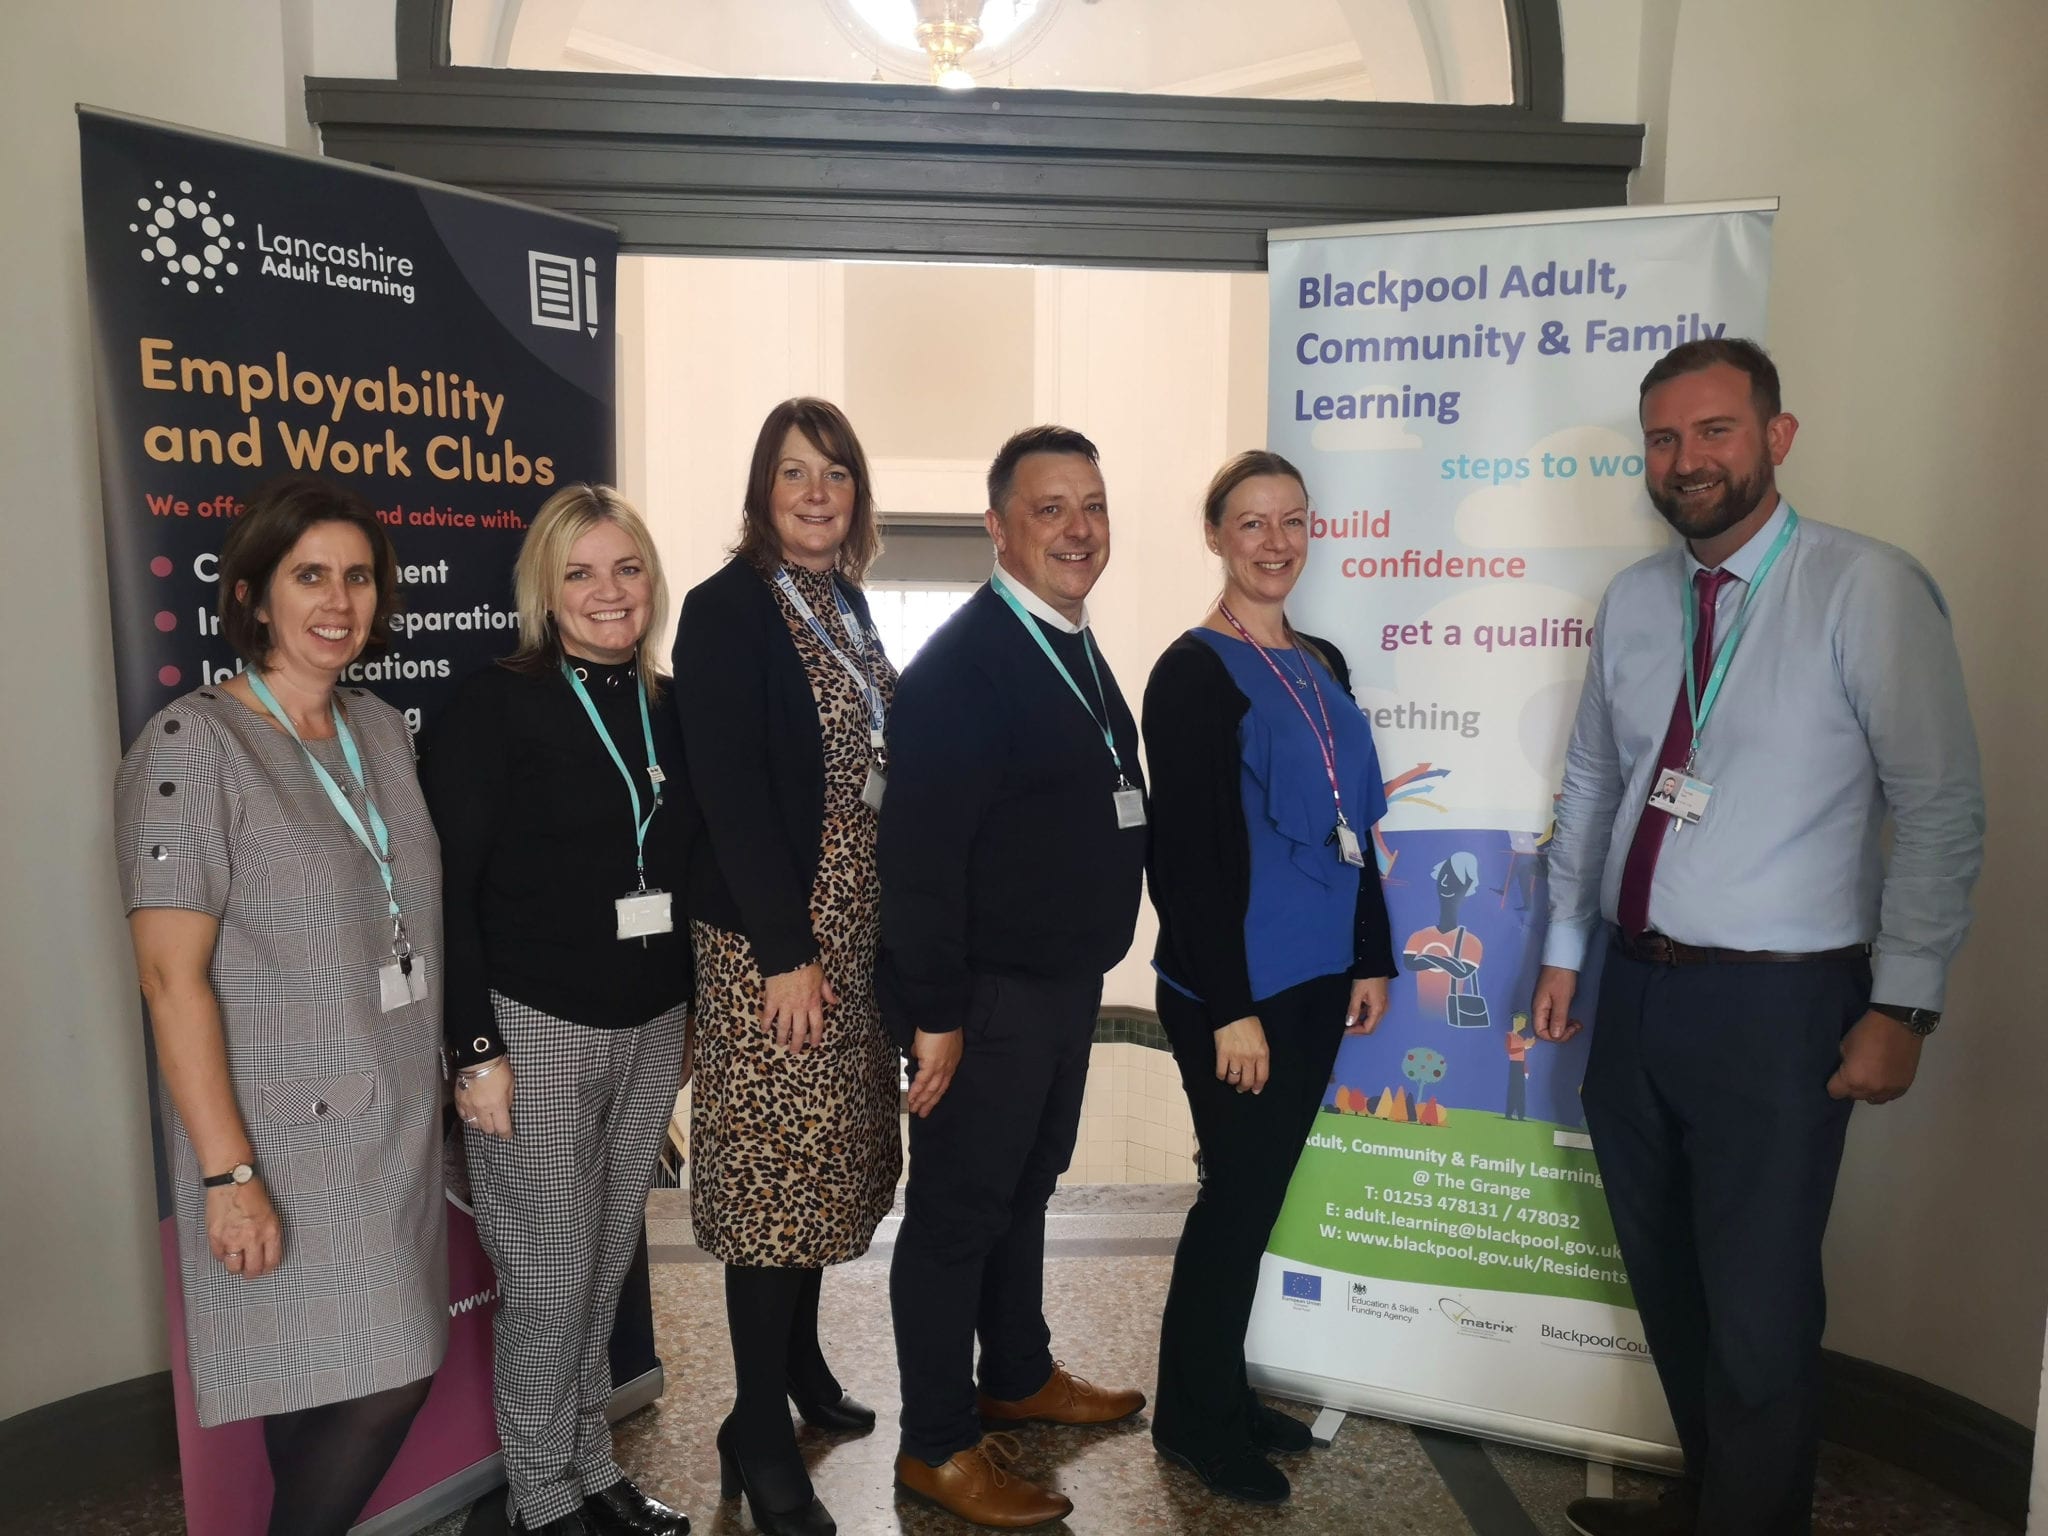 Fylde Coast residents enjoy free employability event as Lancashire Adult Learning teams up with Blackpool Council